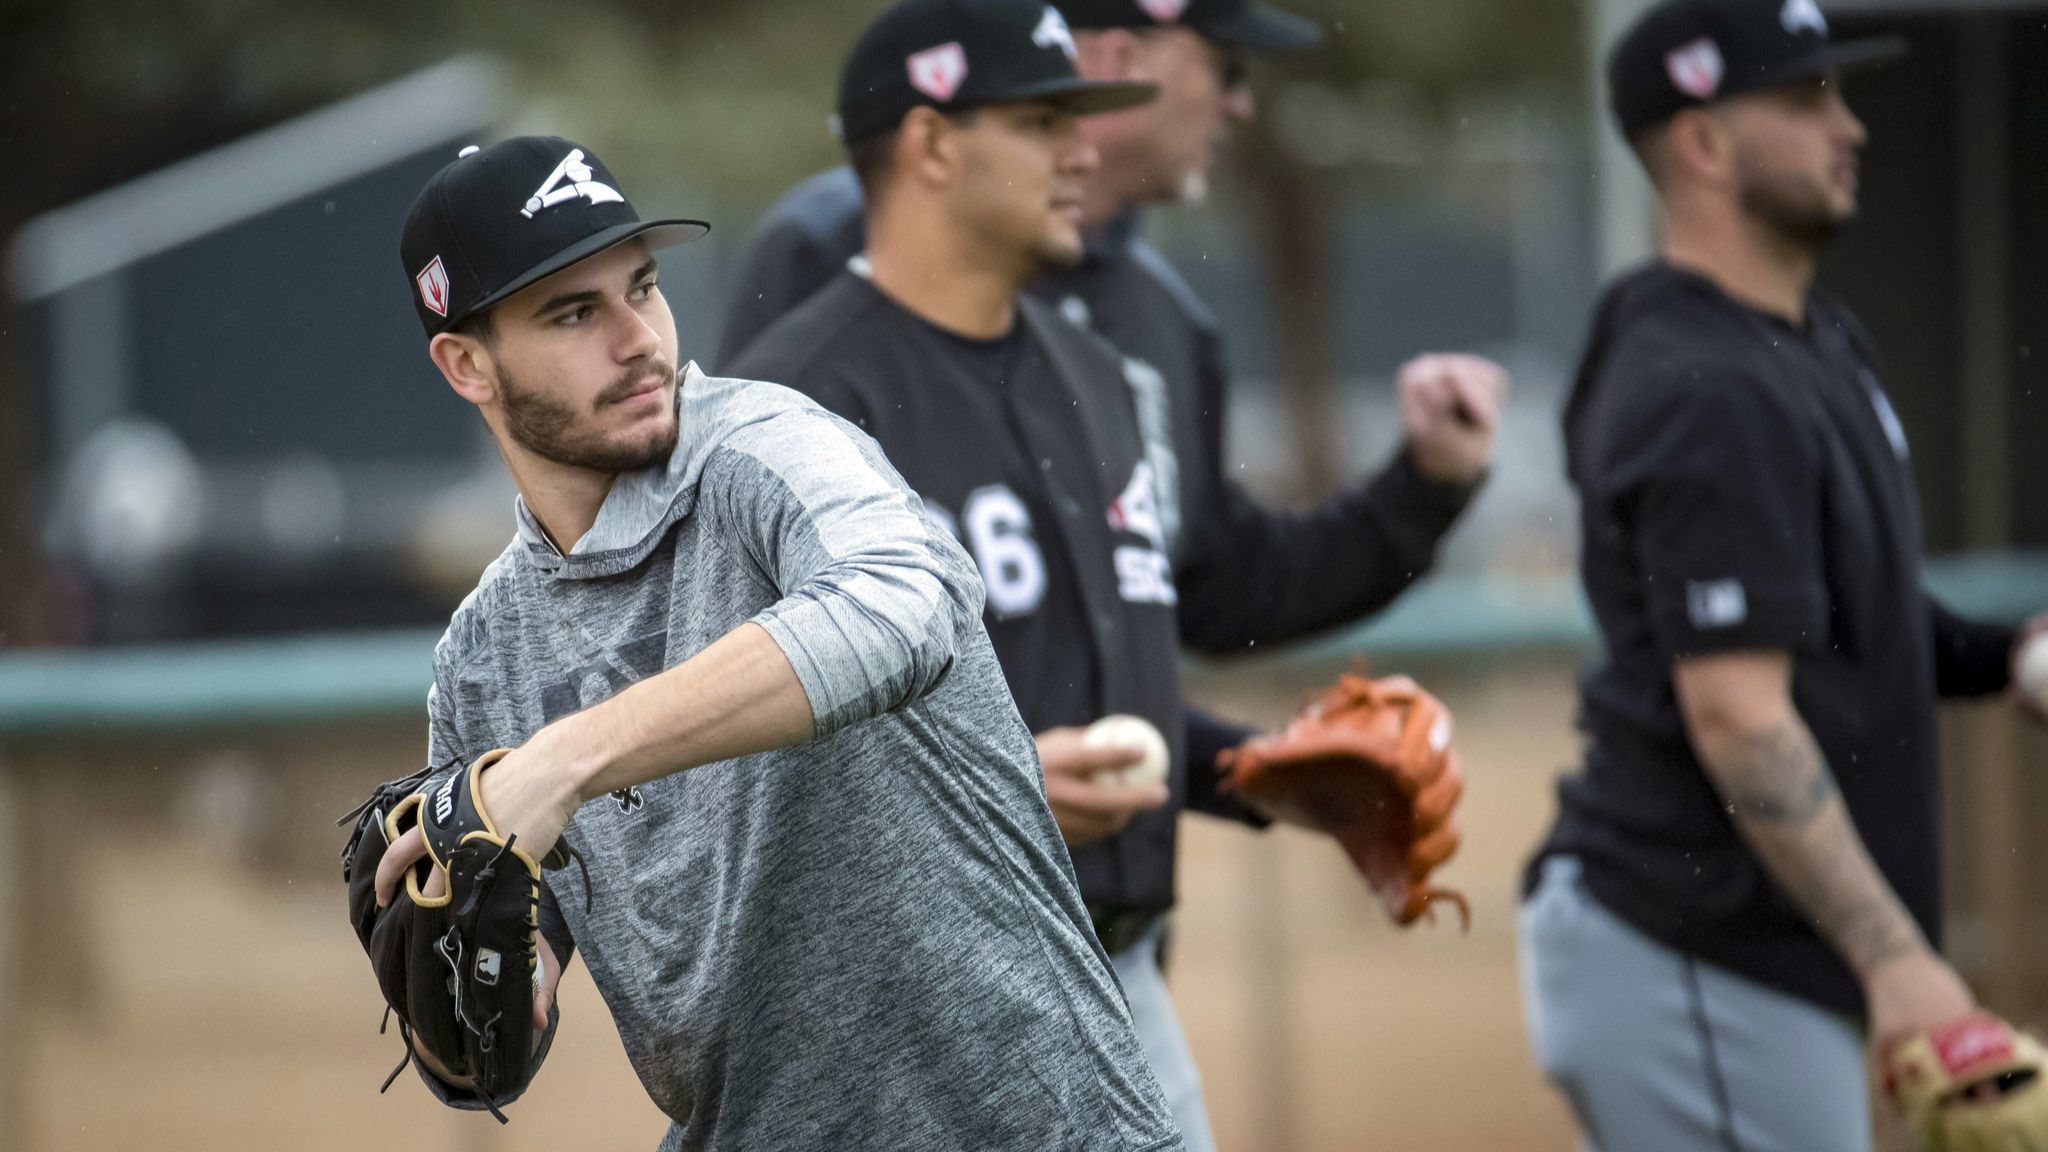 From his game to where he's from: Get to know White Sox prospect